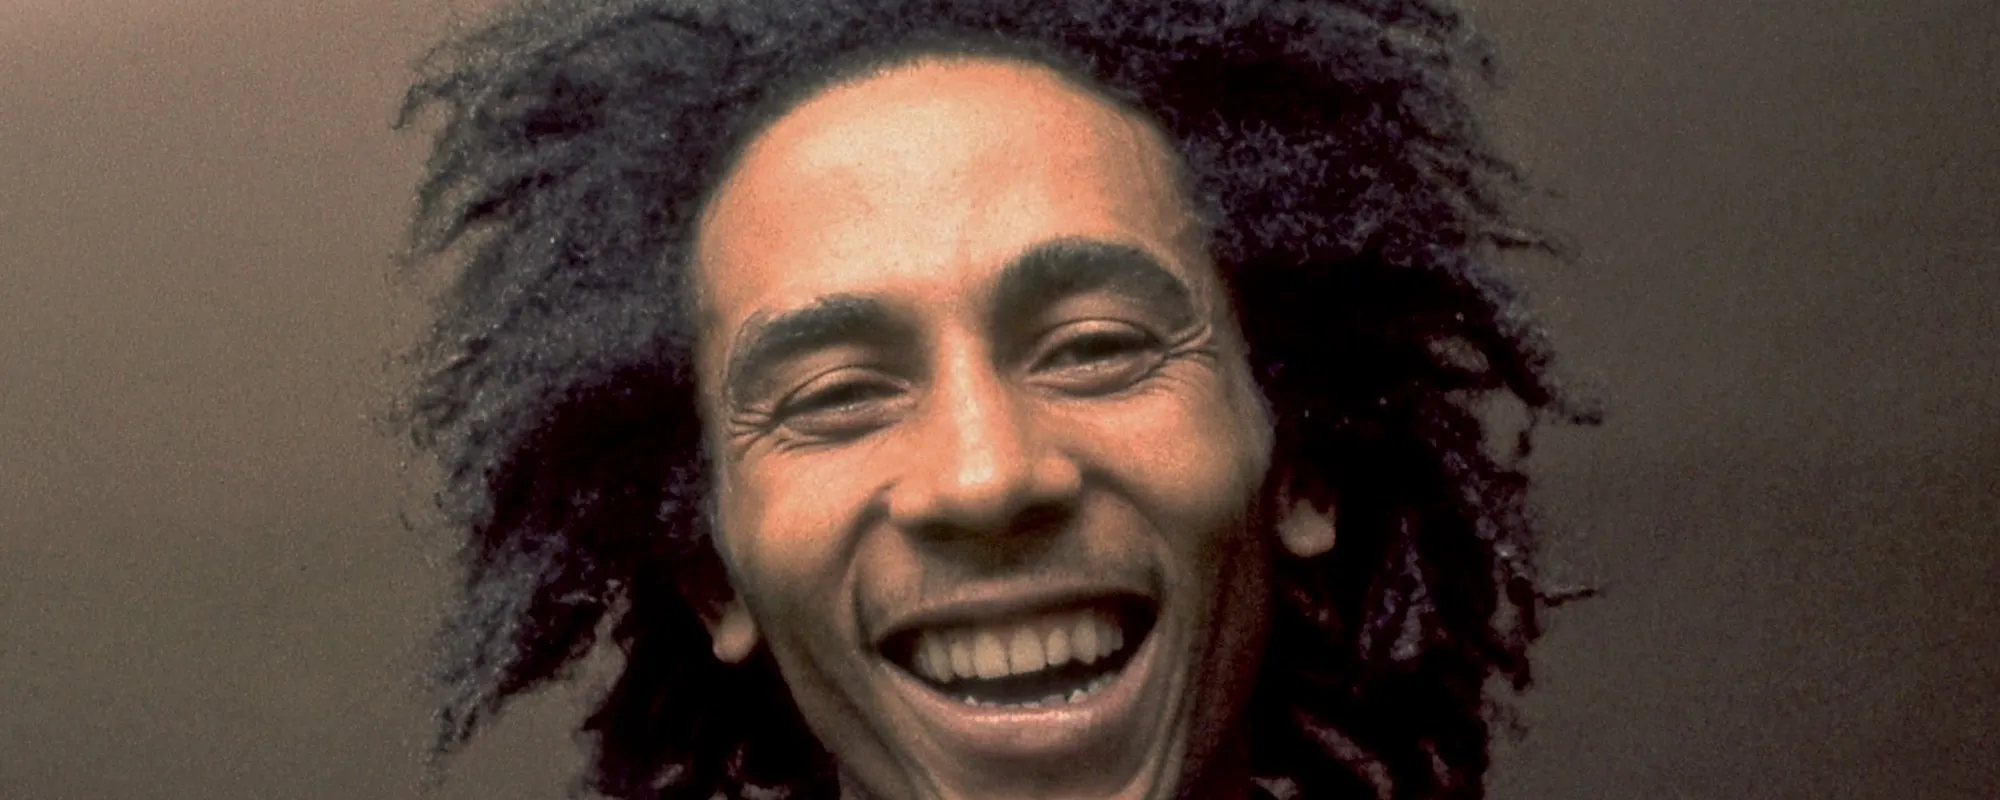 Behind the Song Lyrics: “One Love/People Get Ready” by Bob Marley